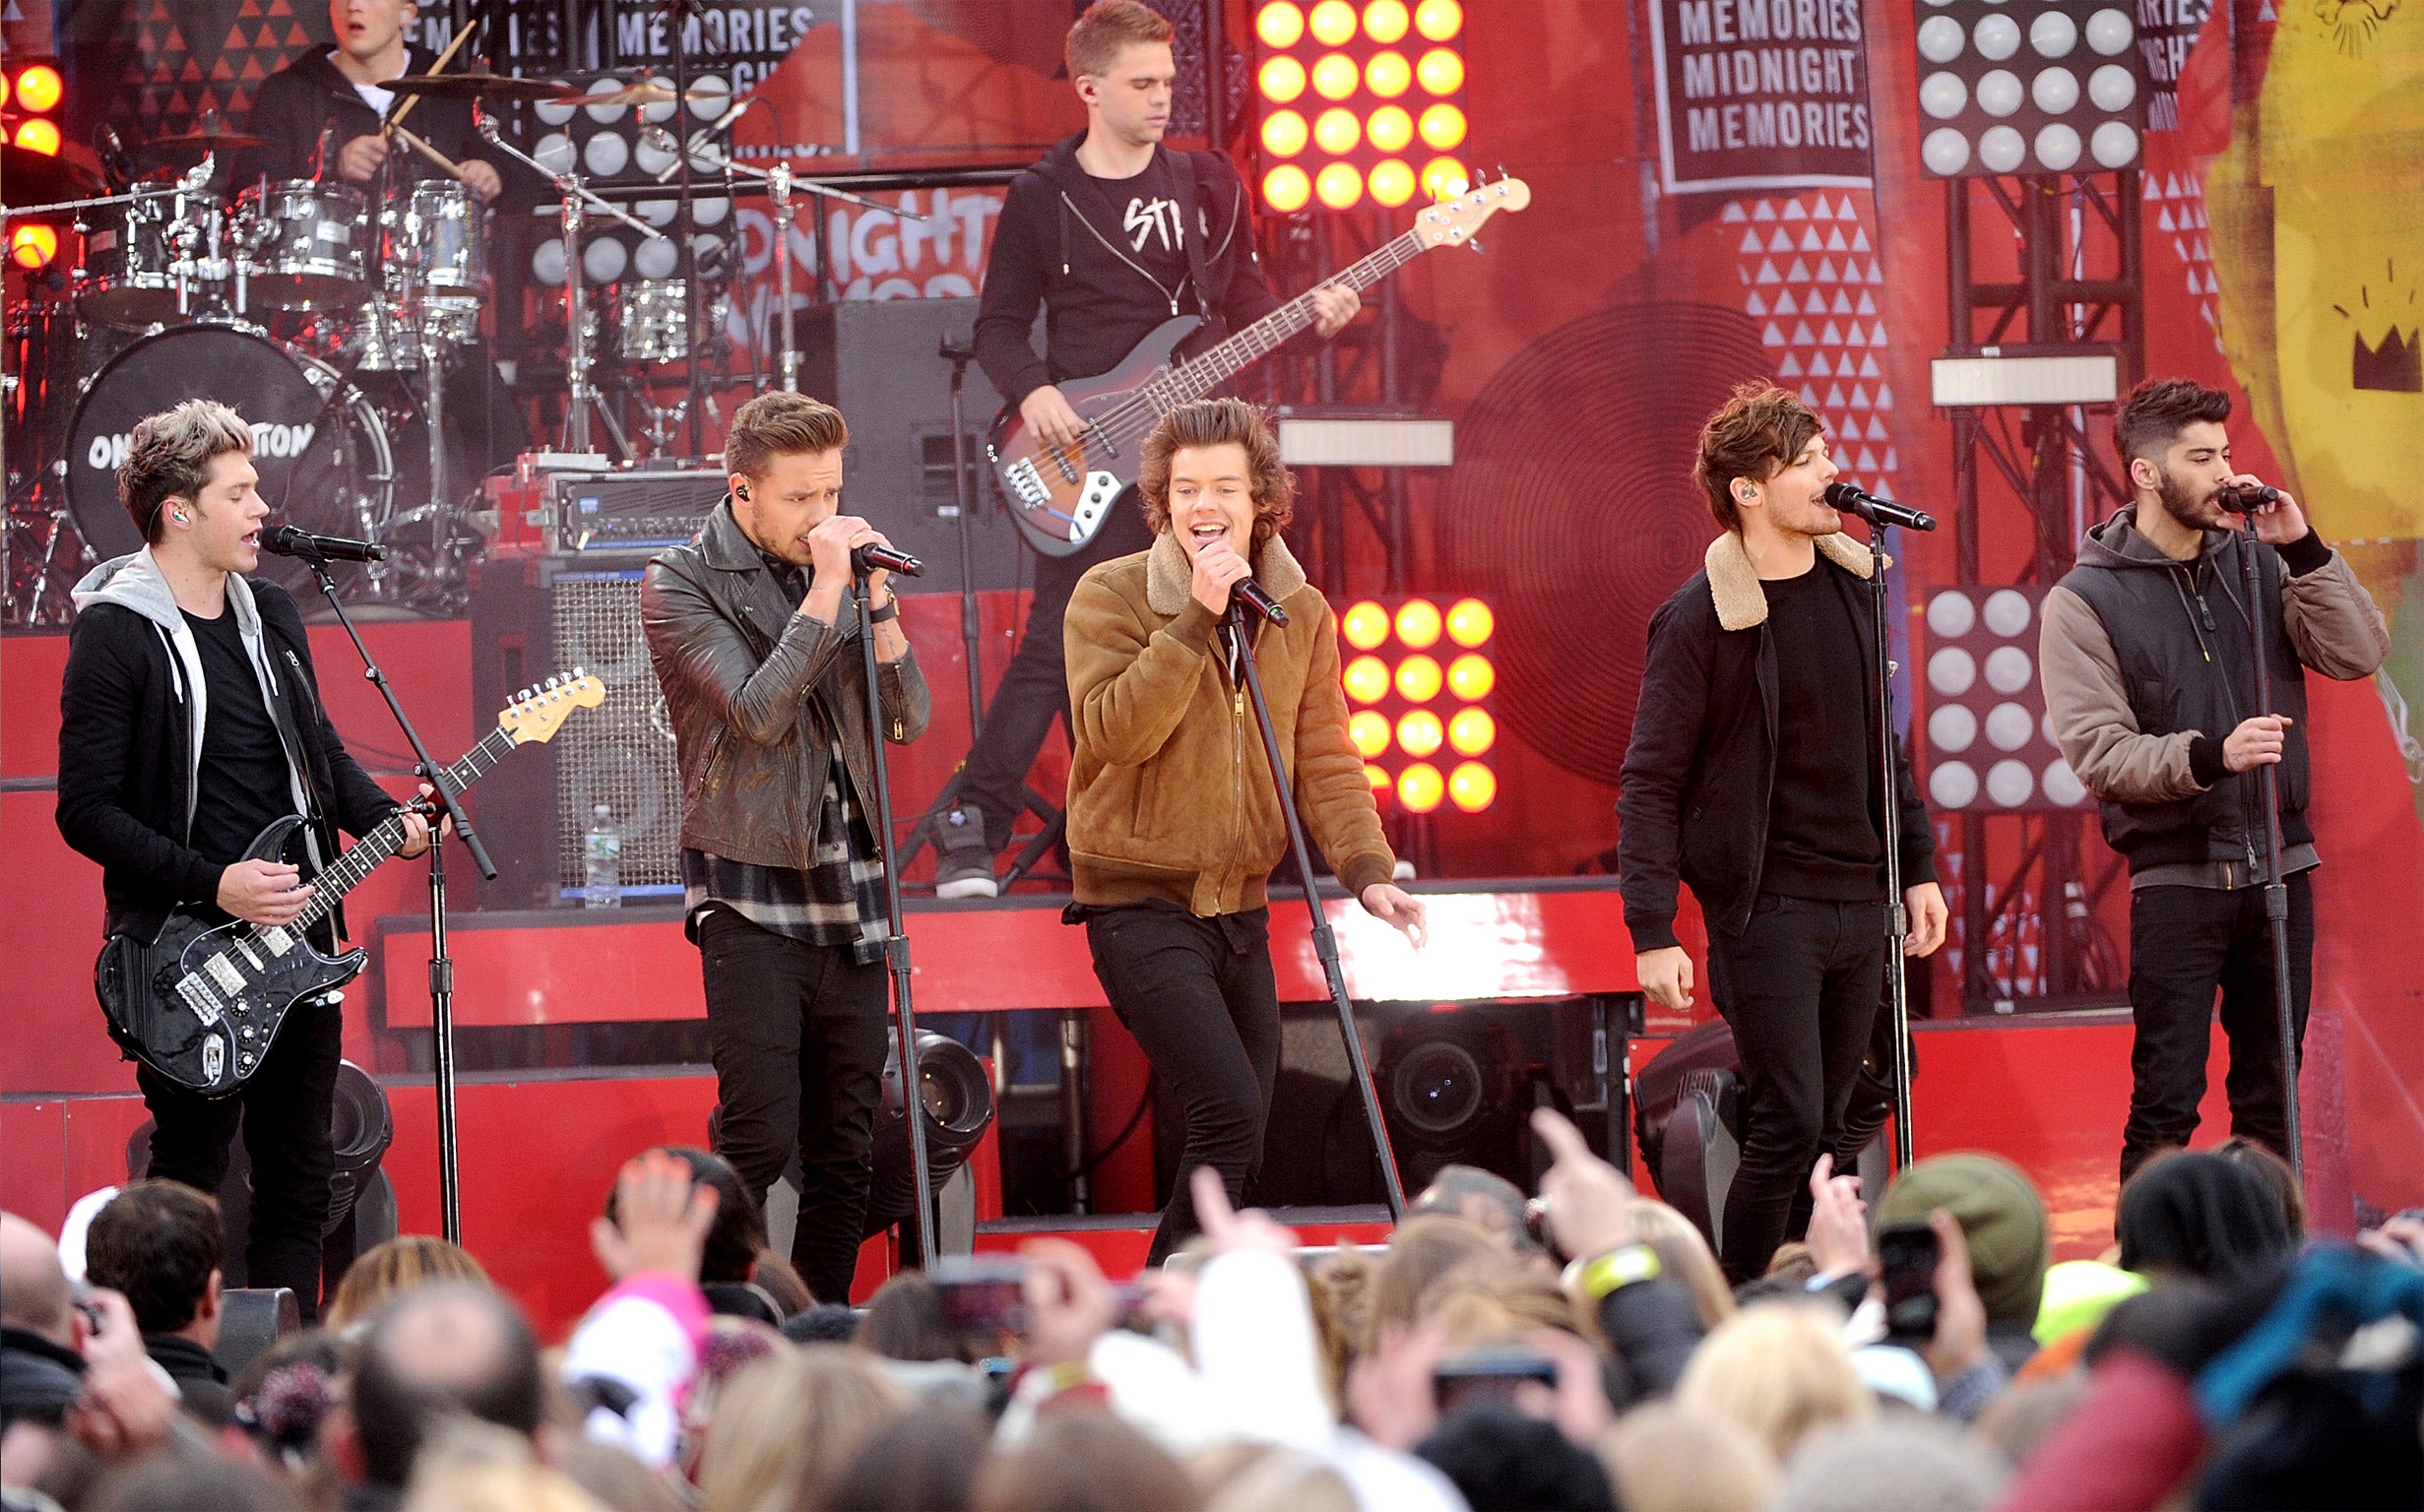 Niall Horan, Liam Payne, Harry Styles, Louis Tomlinson and Zayn Malik of One Direction performing in New York